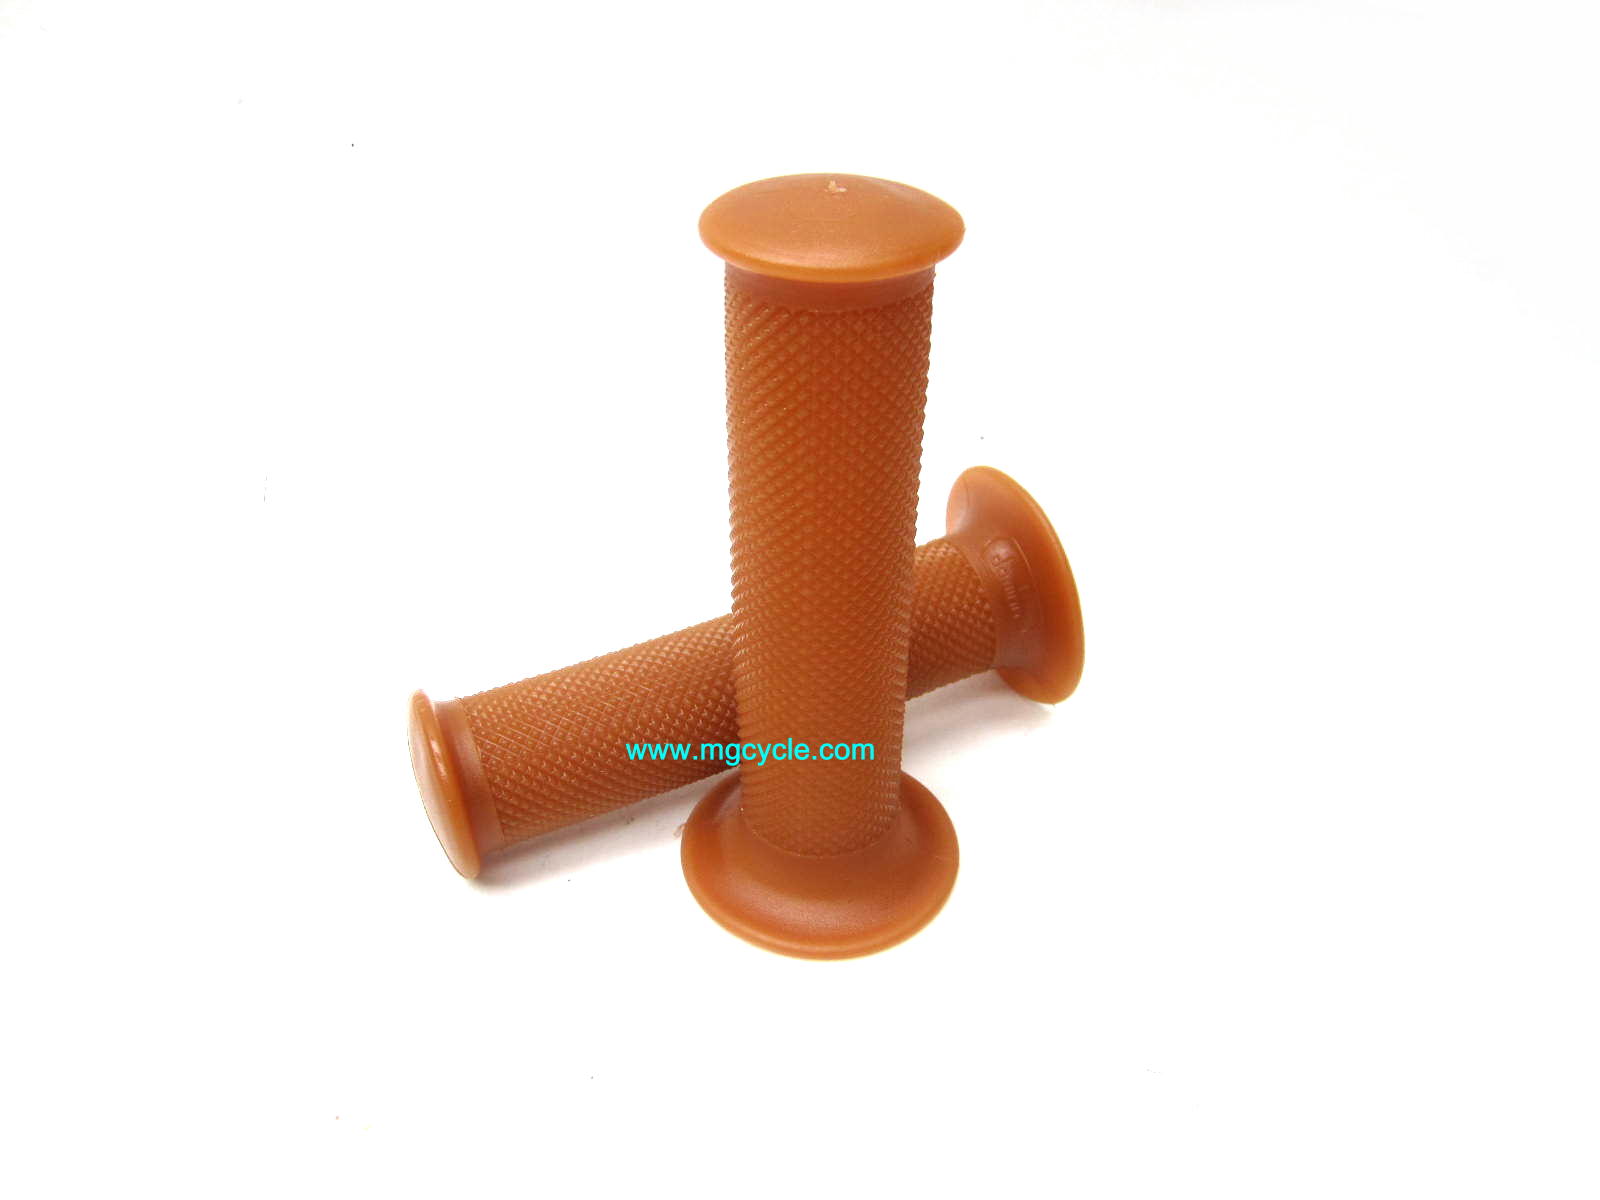 Italian Domino Cafe Racer Vintage Grips, classic natural color